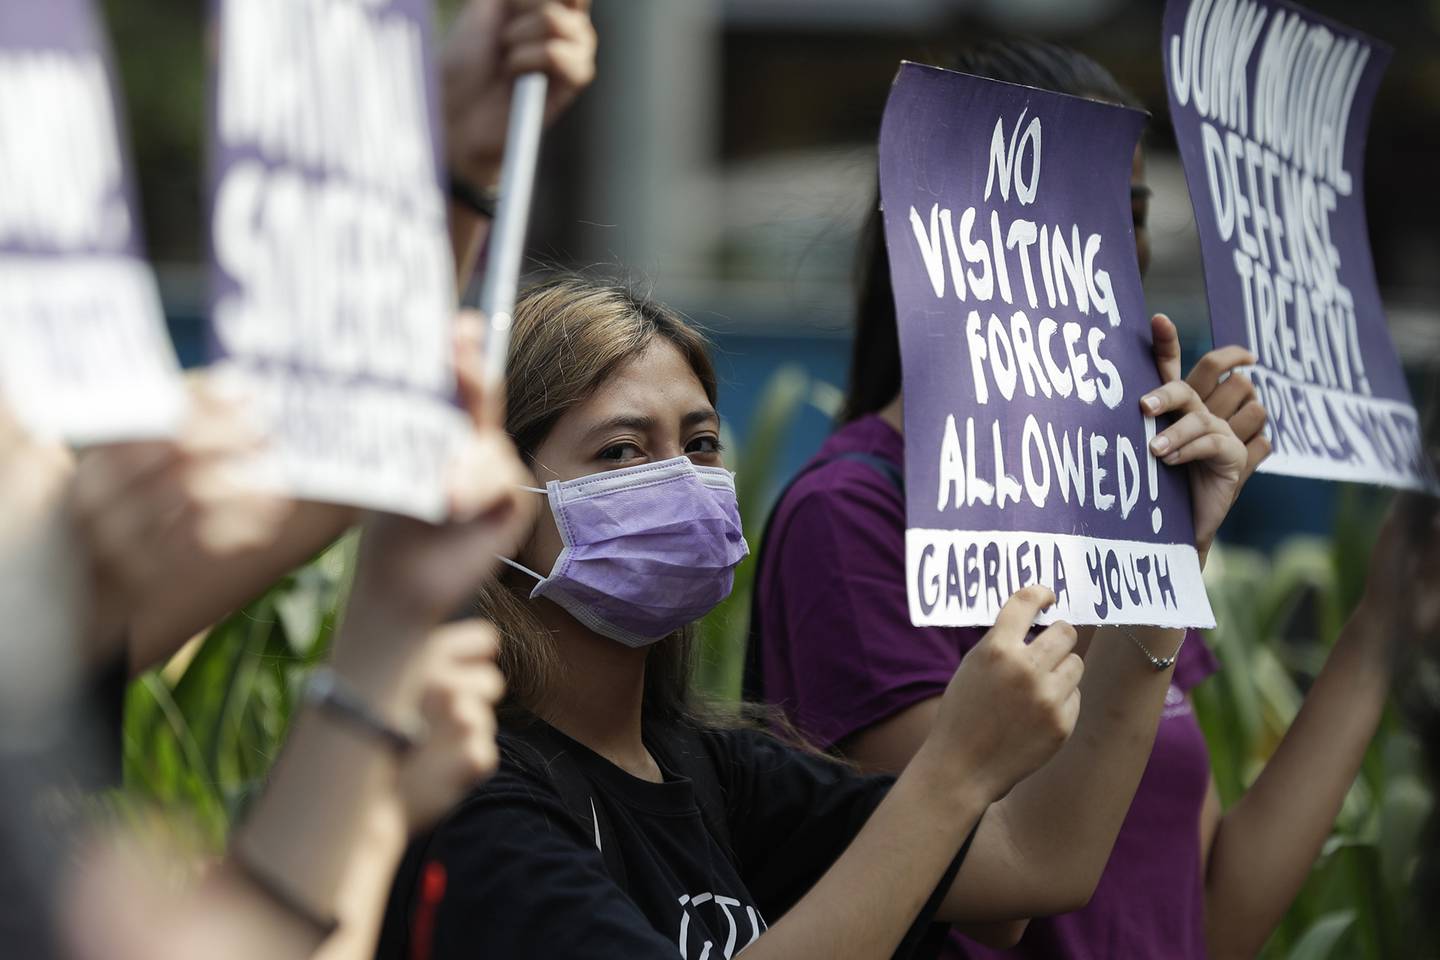 In this March 6, 2020, file photo, a woman protester wearing a protective mask holds a slogan during a rally outside the U.S. Embassy in Manila, Philippines, against the planned military exercises between the Philippines and U.S. under the Visiting Forces Agreement.